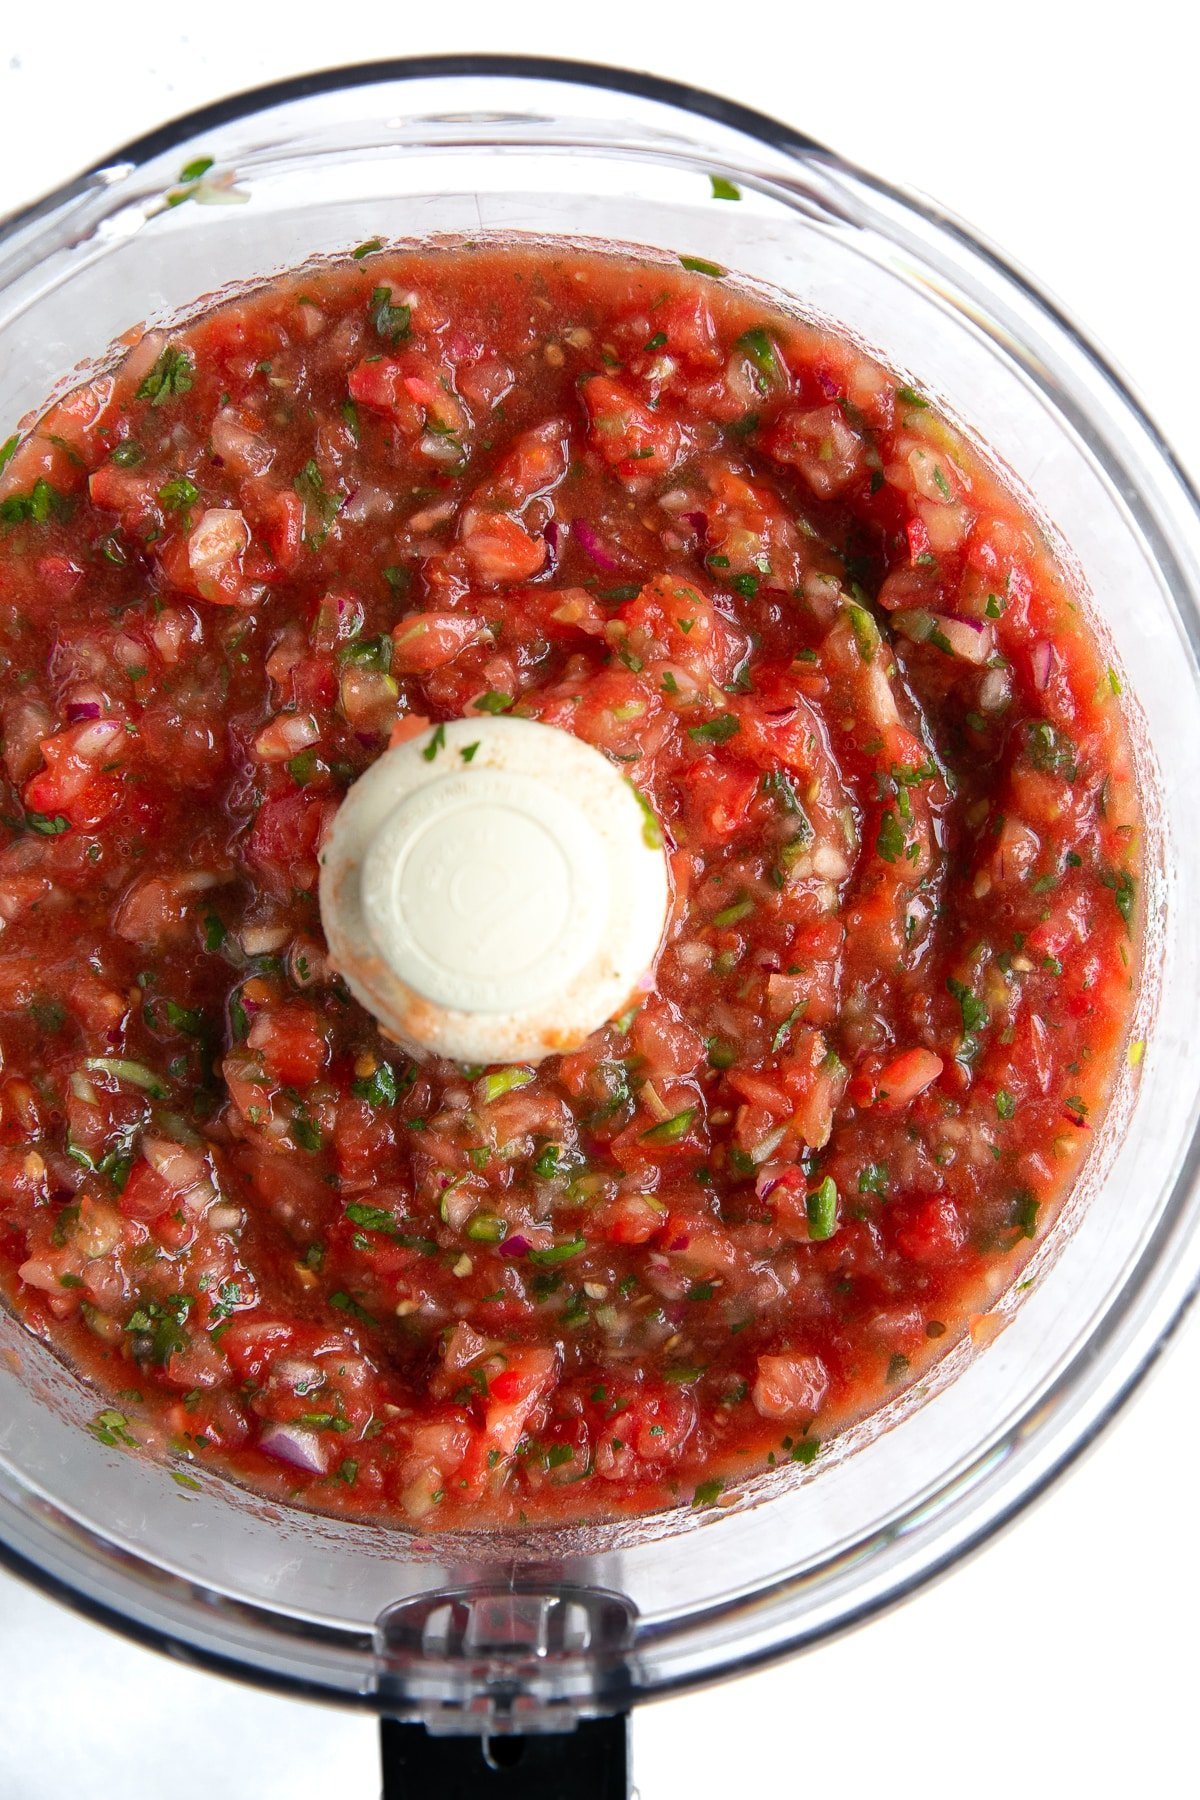 Food processor filled with blended homemade tomato salsa.